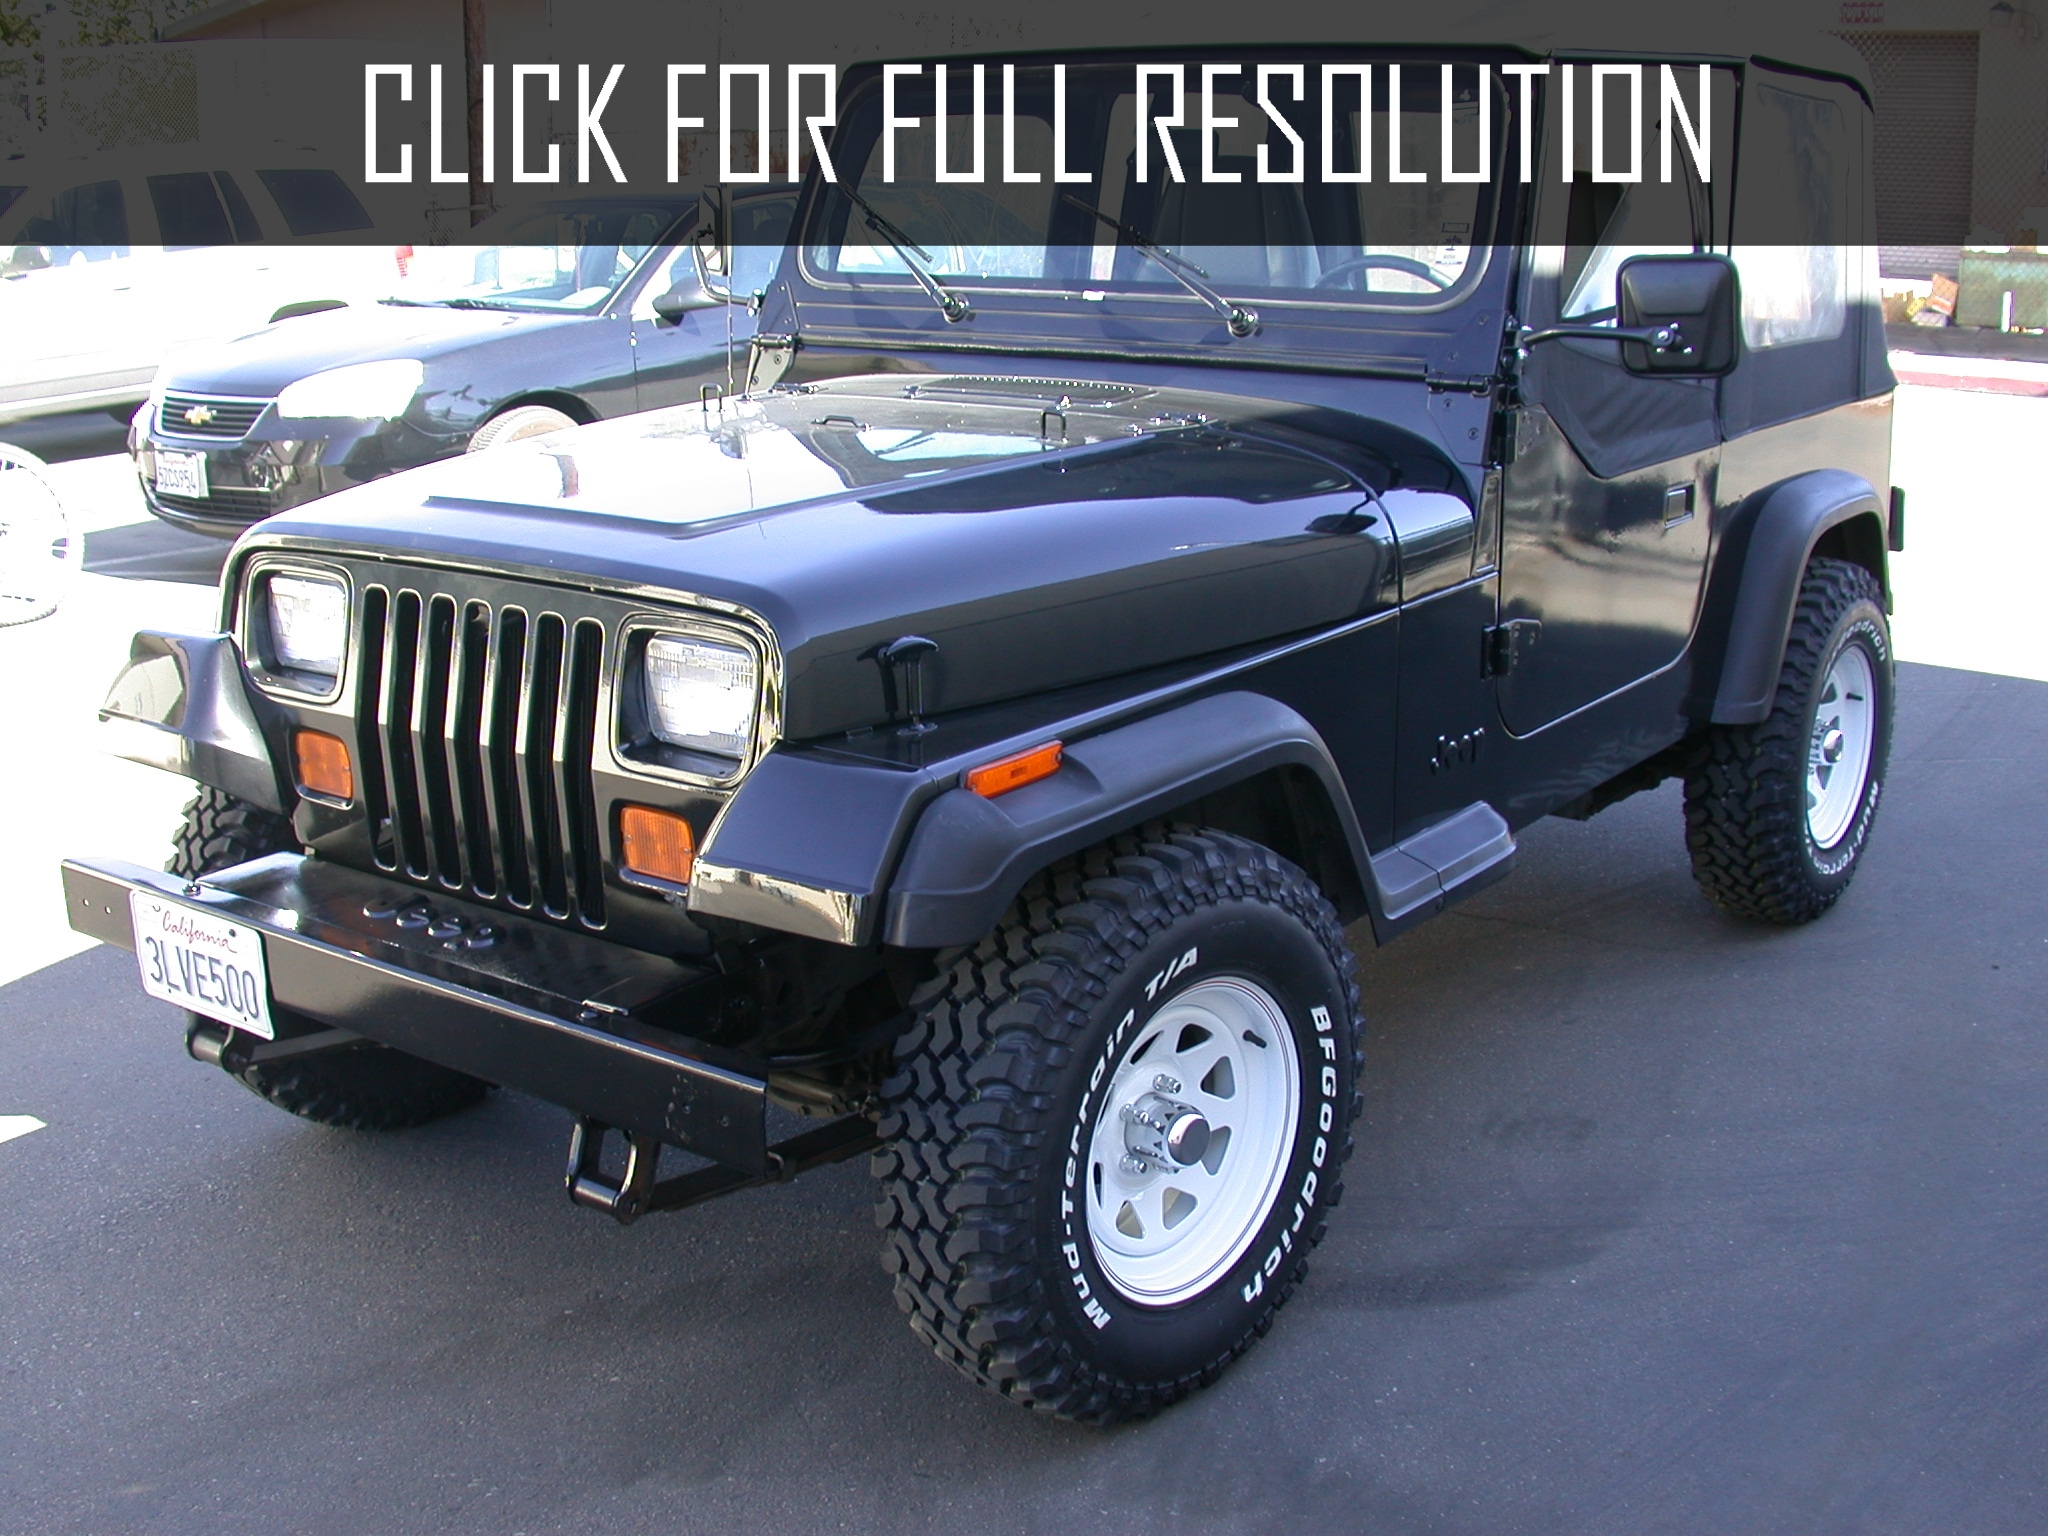 1995 Jeep Wrangler Rubicon best image gallery #19/24 - share and download